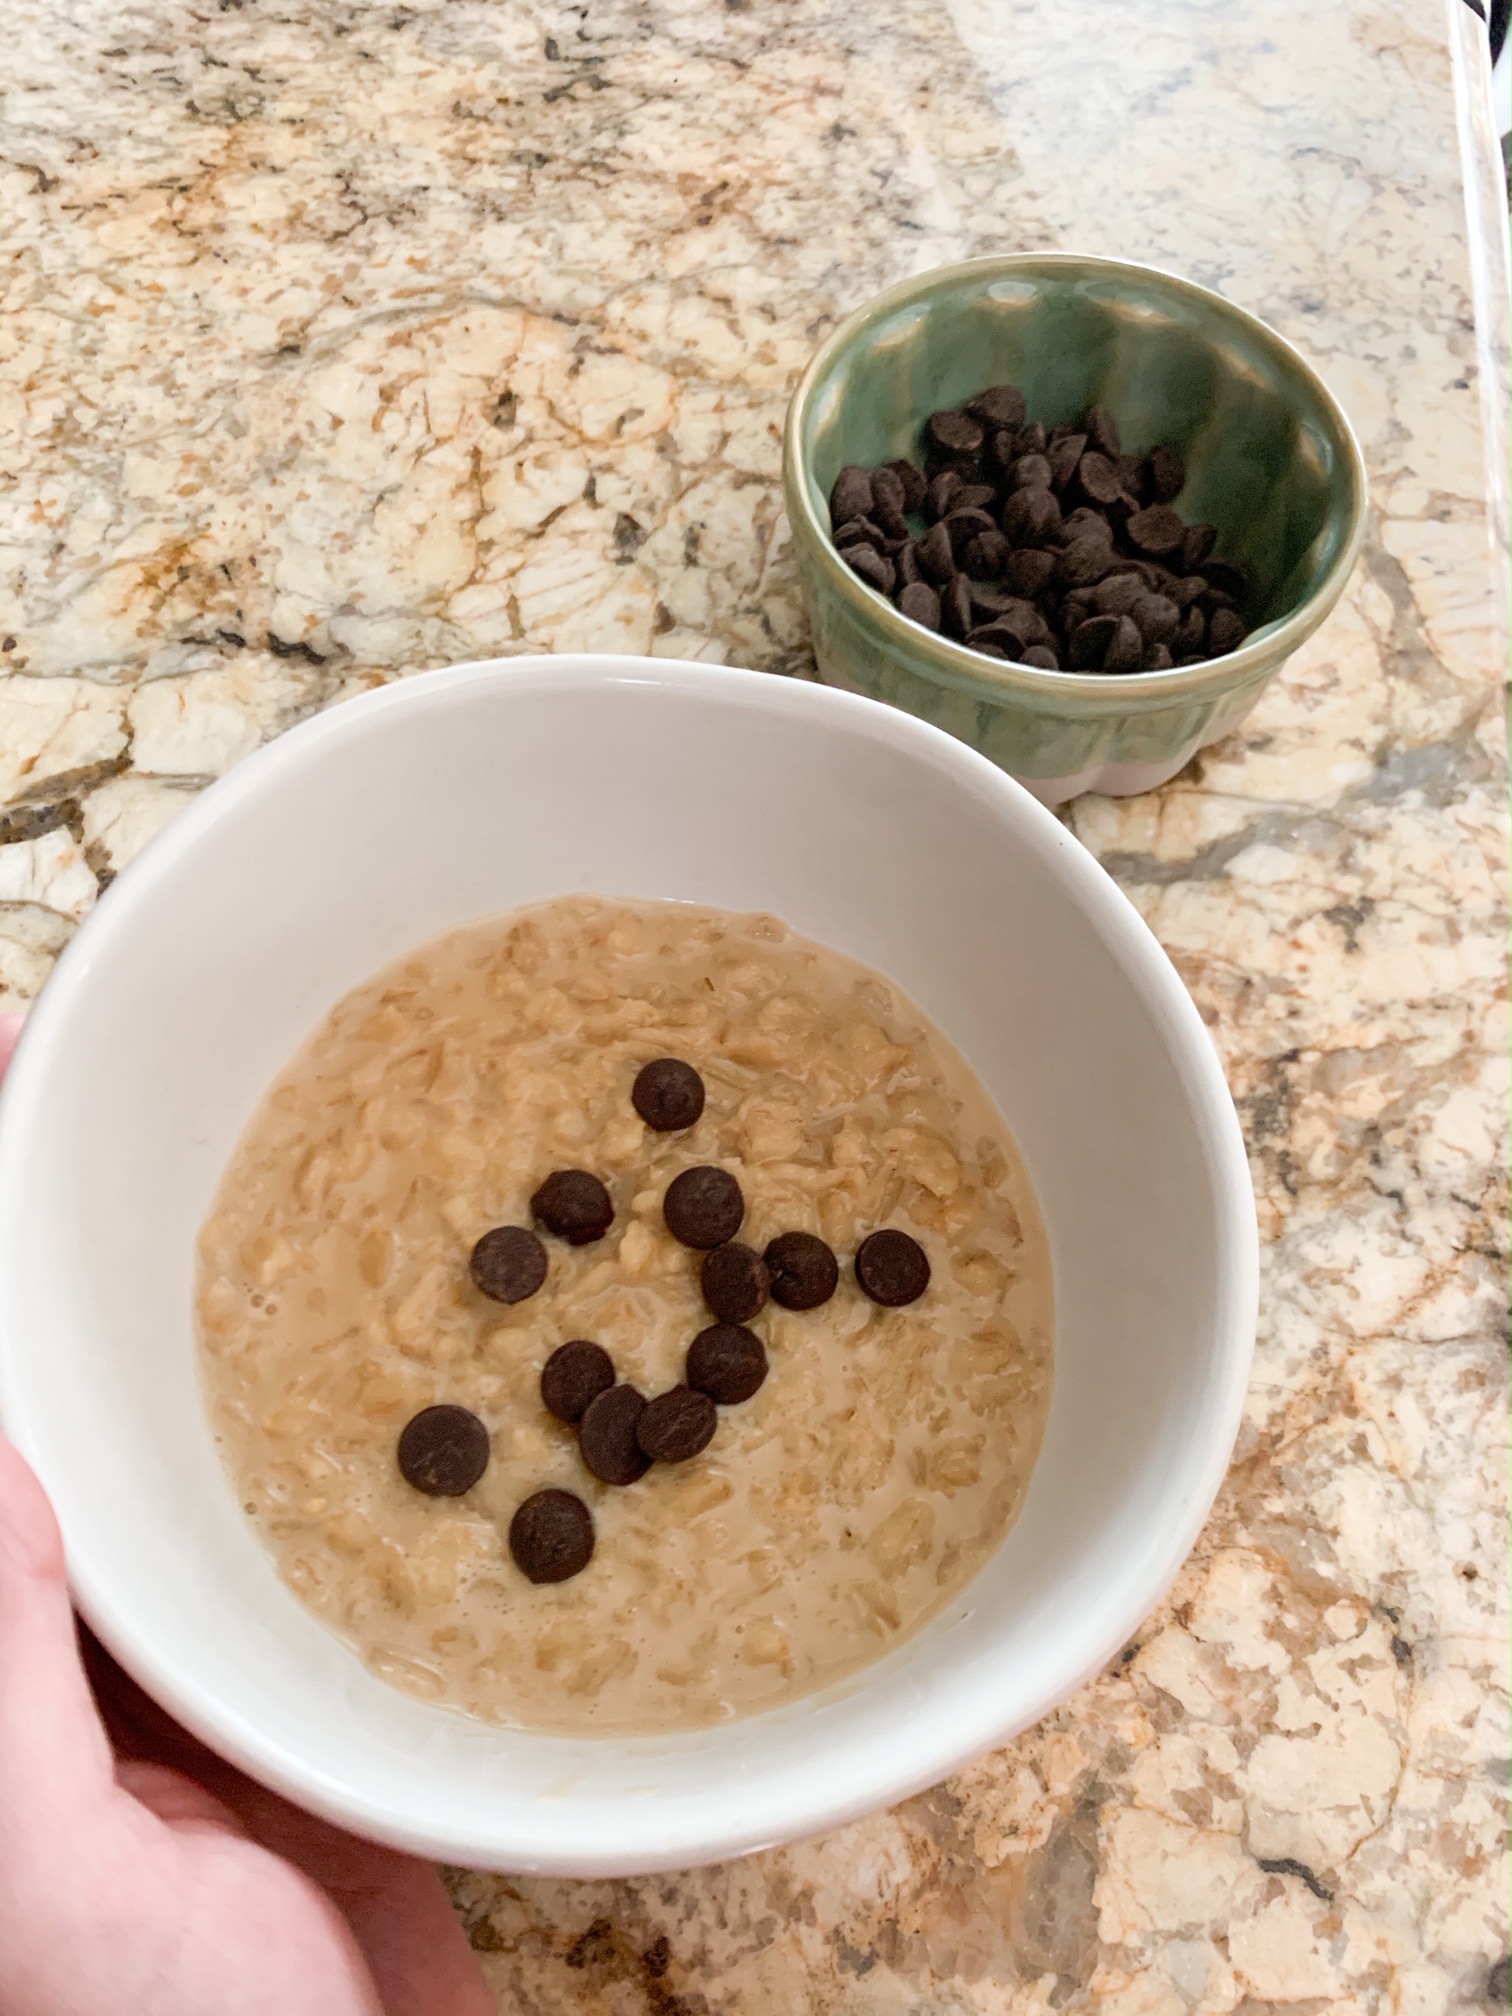 oatmeal with chocolate chips in a white bowl with a small green bowl with chocolate chips on a granite countertop